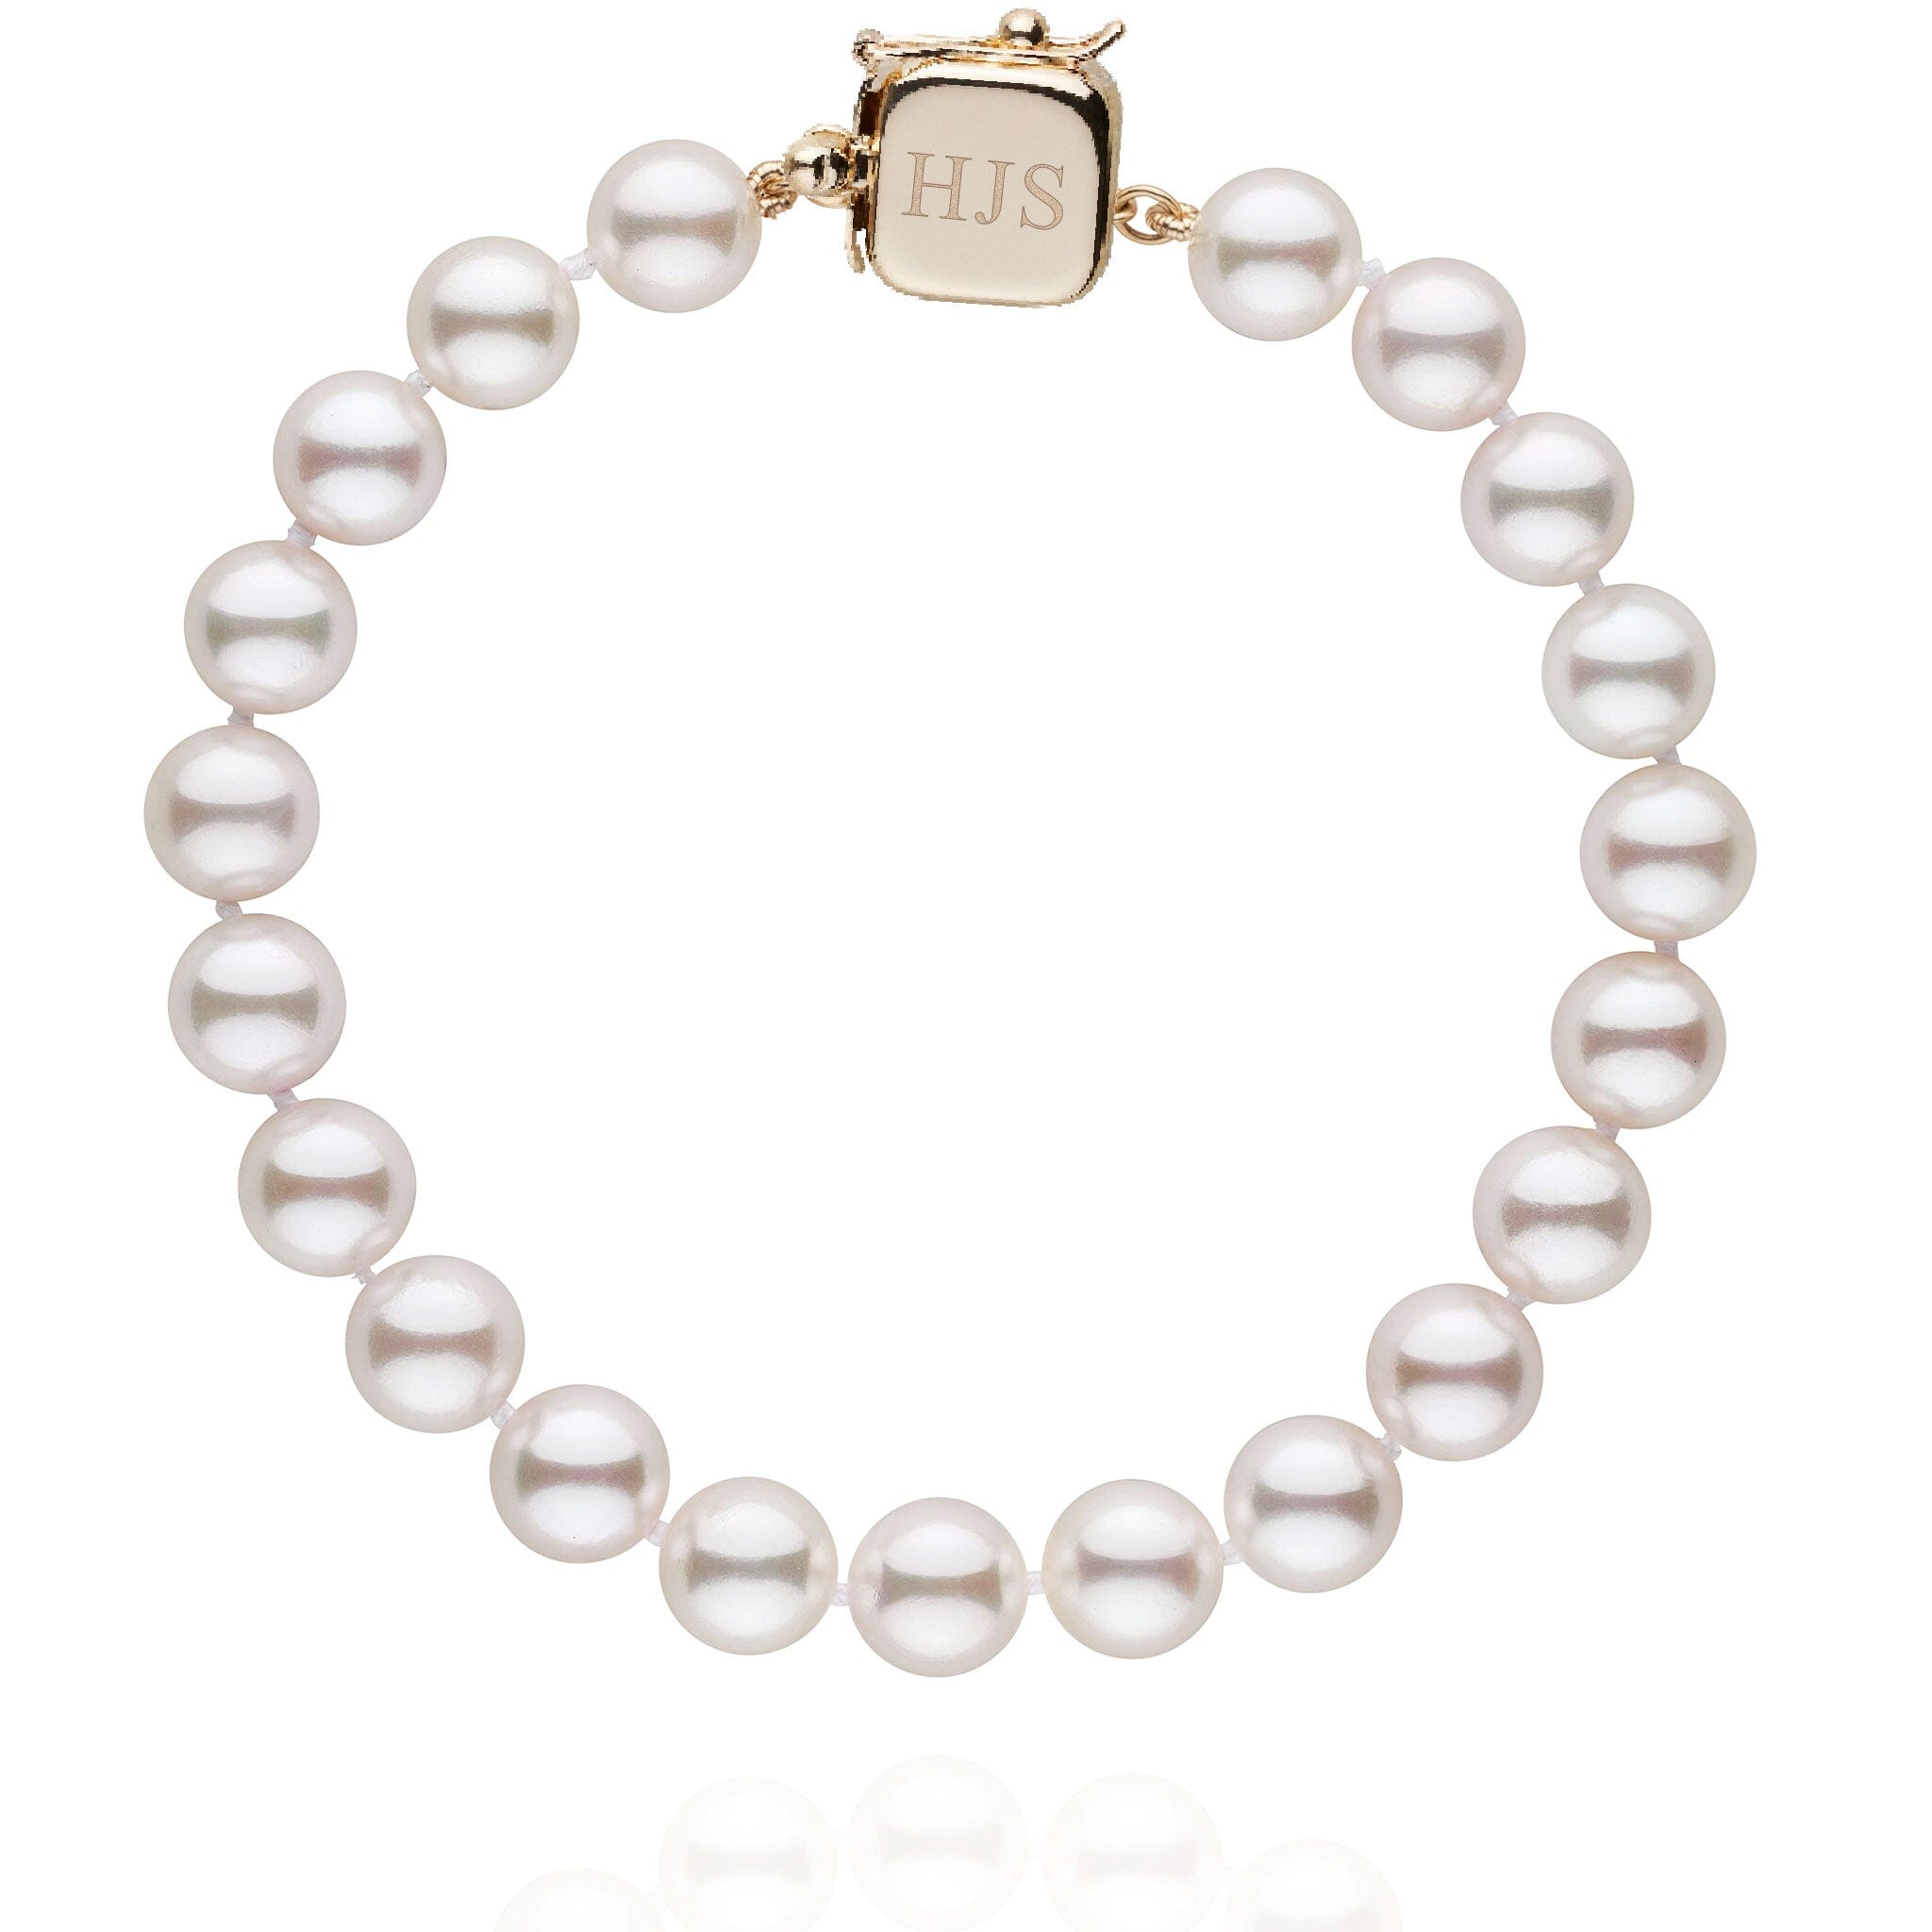 Personalized 7.5-8.0 mm AAA Akoya Pearl Square Clasp Bracelet